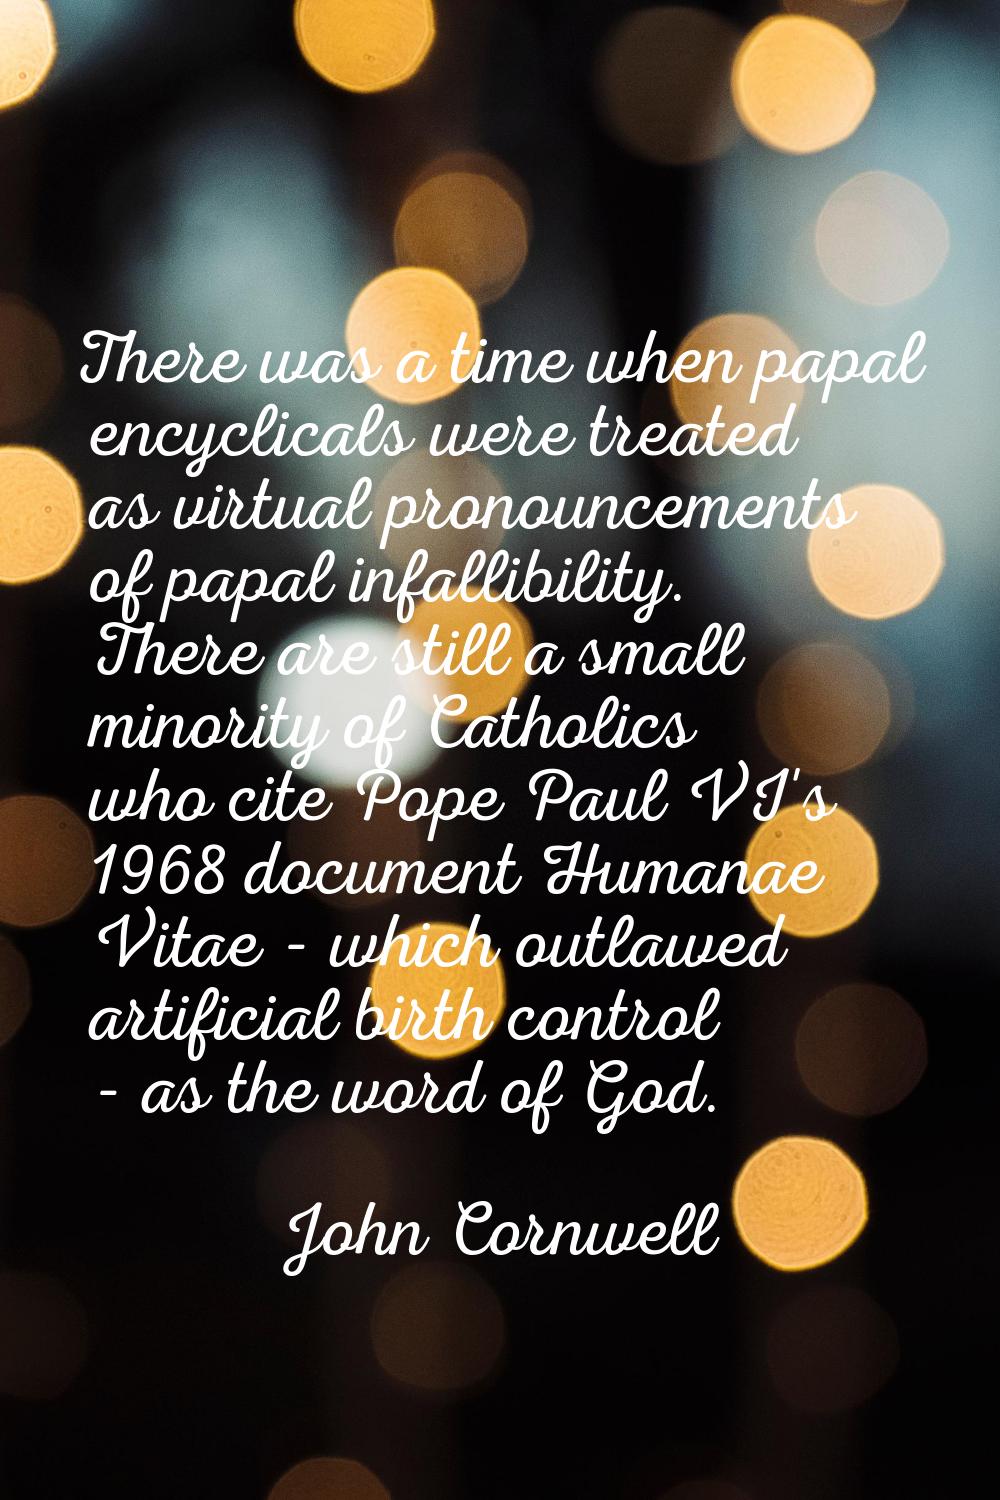 There was a time when papal encyclicals were treated as virtual pronouncements of papal infallibili